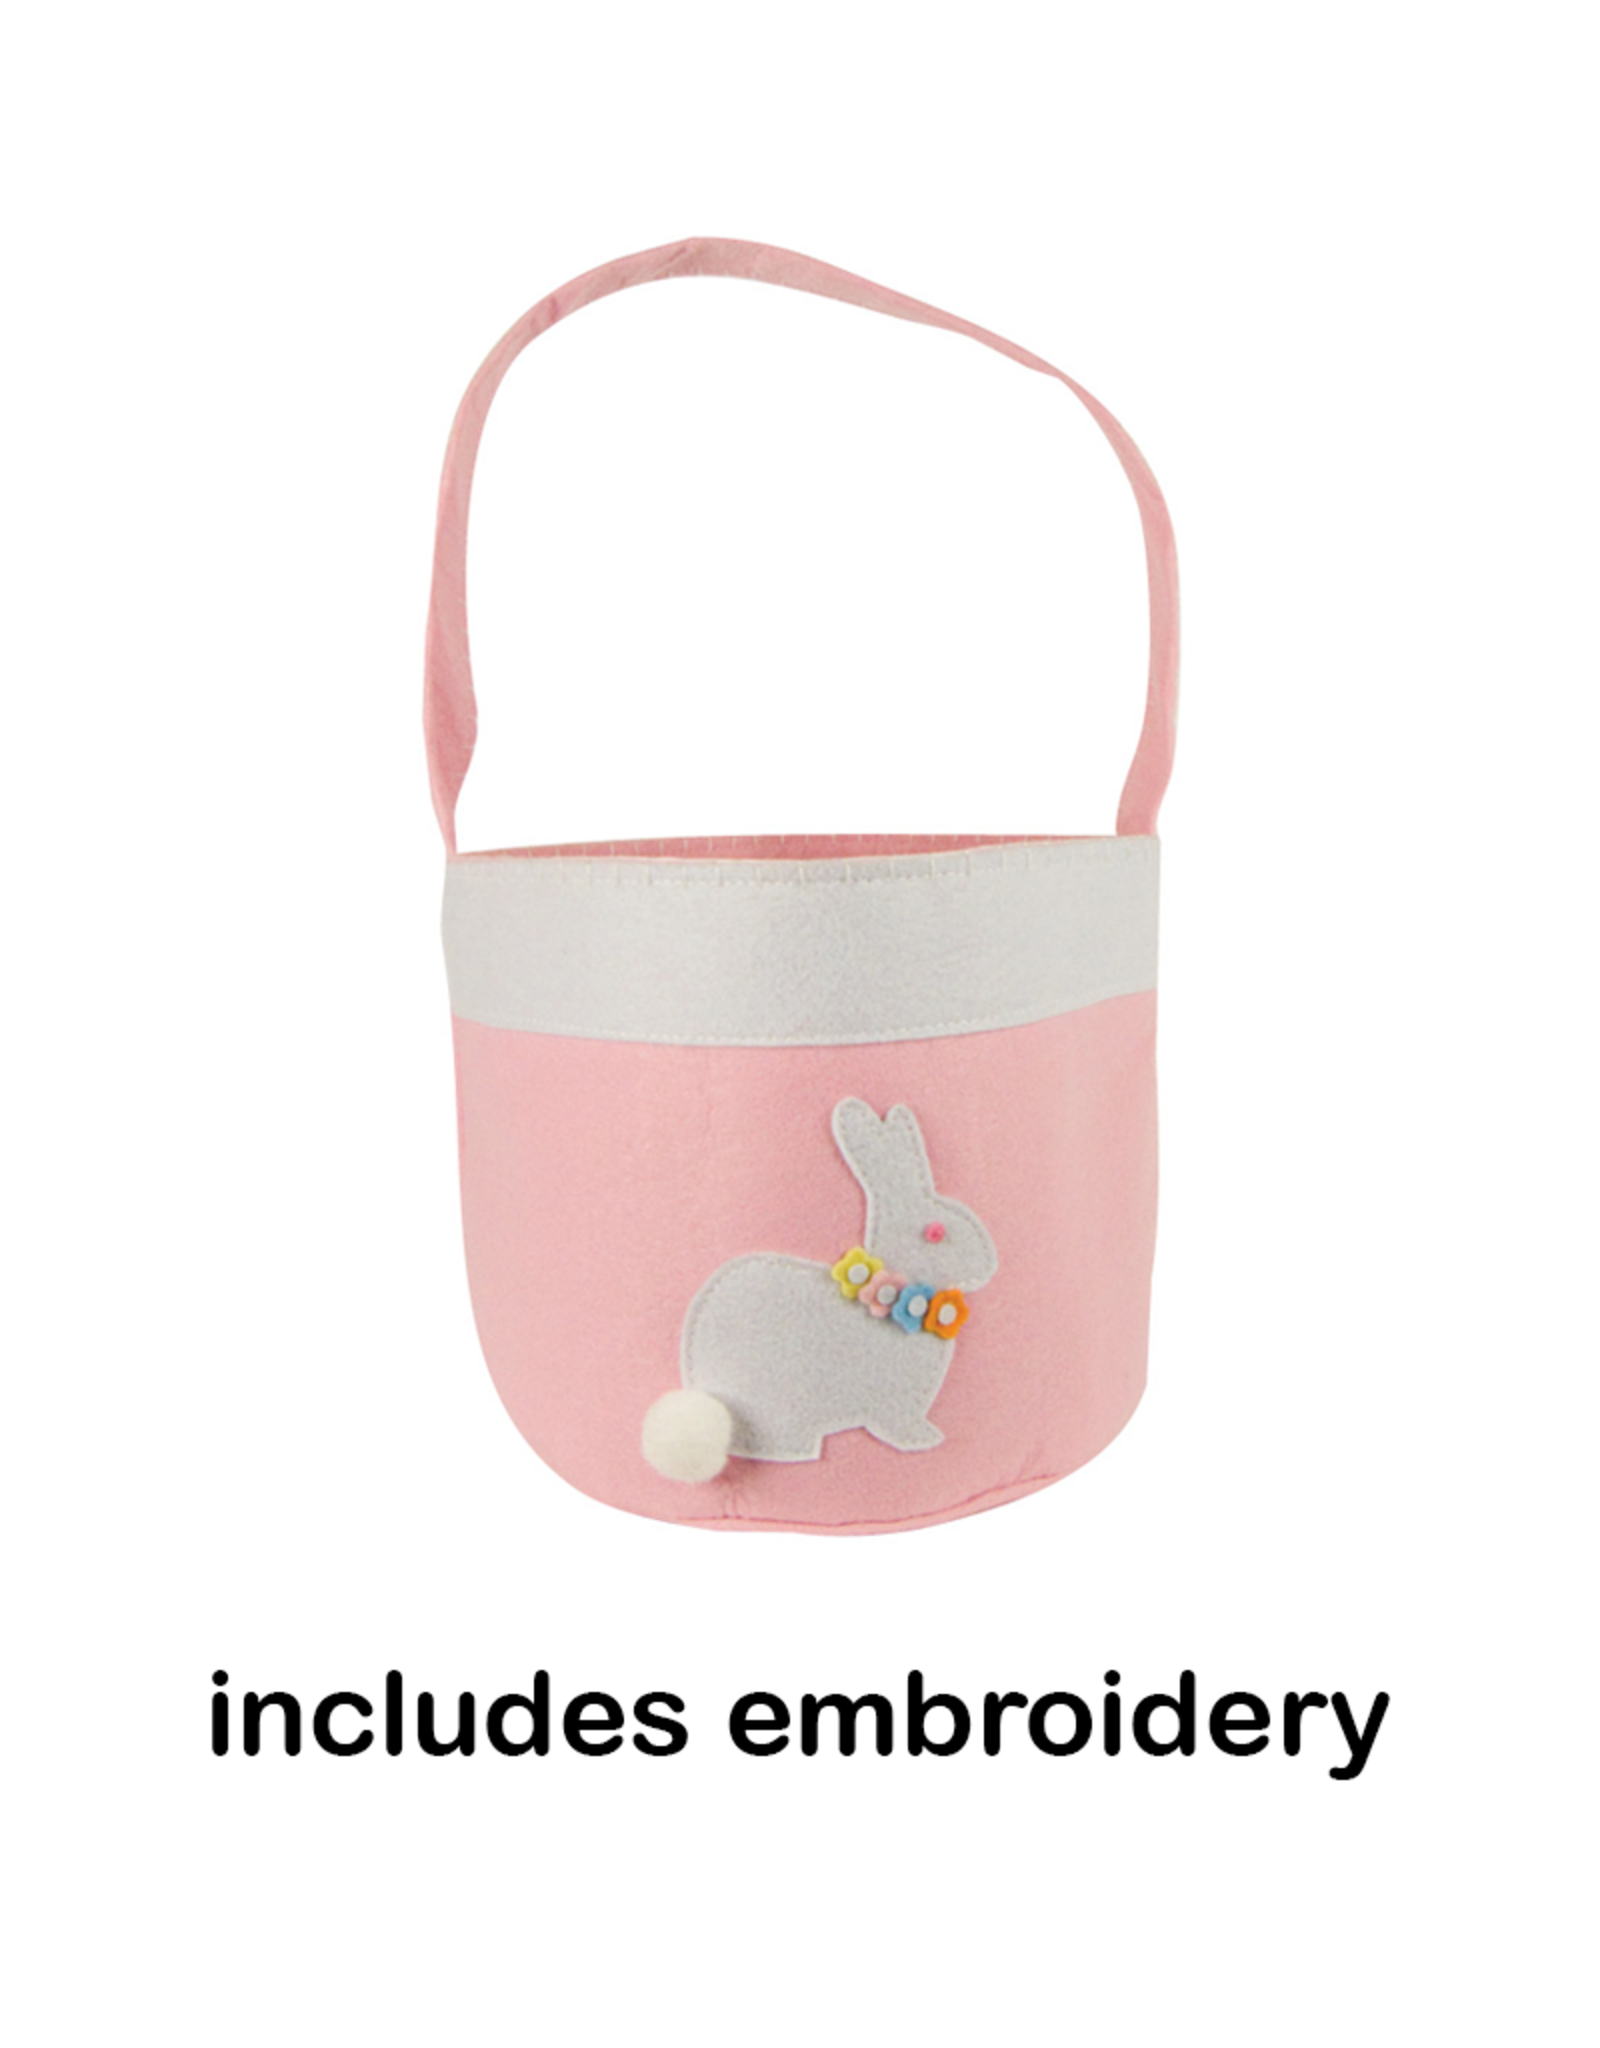 Groovy Holidays Bunny Basket w/embroidery april pink